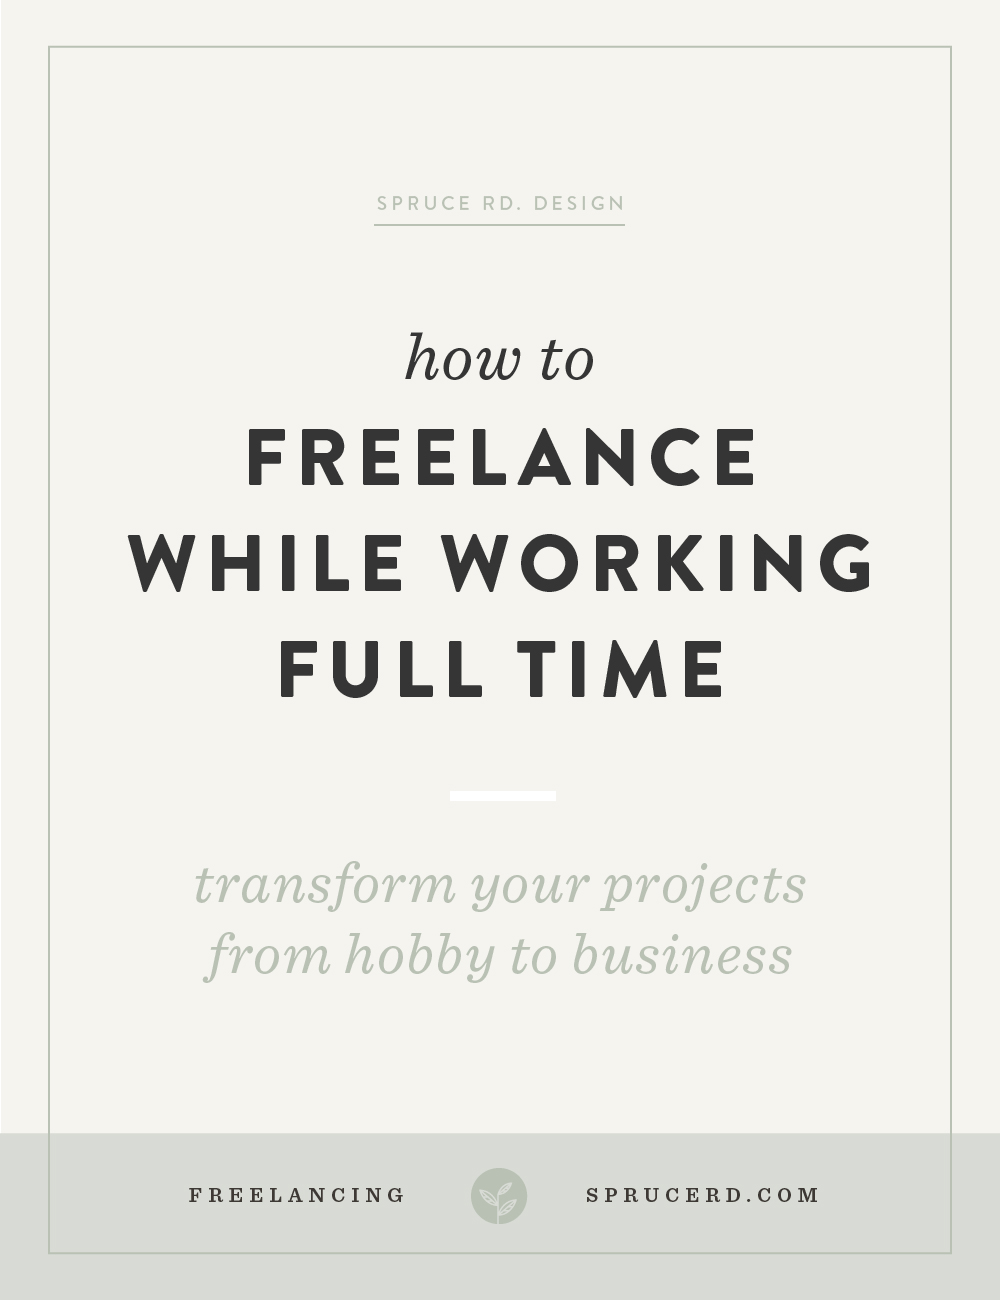 How to freelance while working full time | Spruce Rd. | $50 logos. Endless revisions. “Nightmare” clients. I’ve experienced it all while freelancing on the side. I’m sharing a few tips I learned along the way on how to treat your side freelance proj…